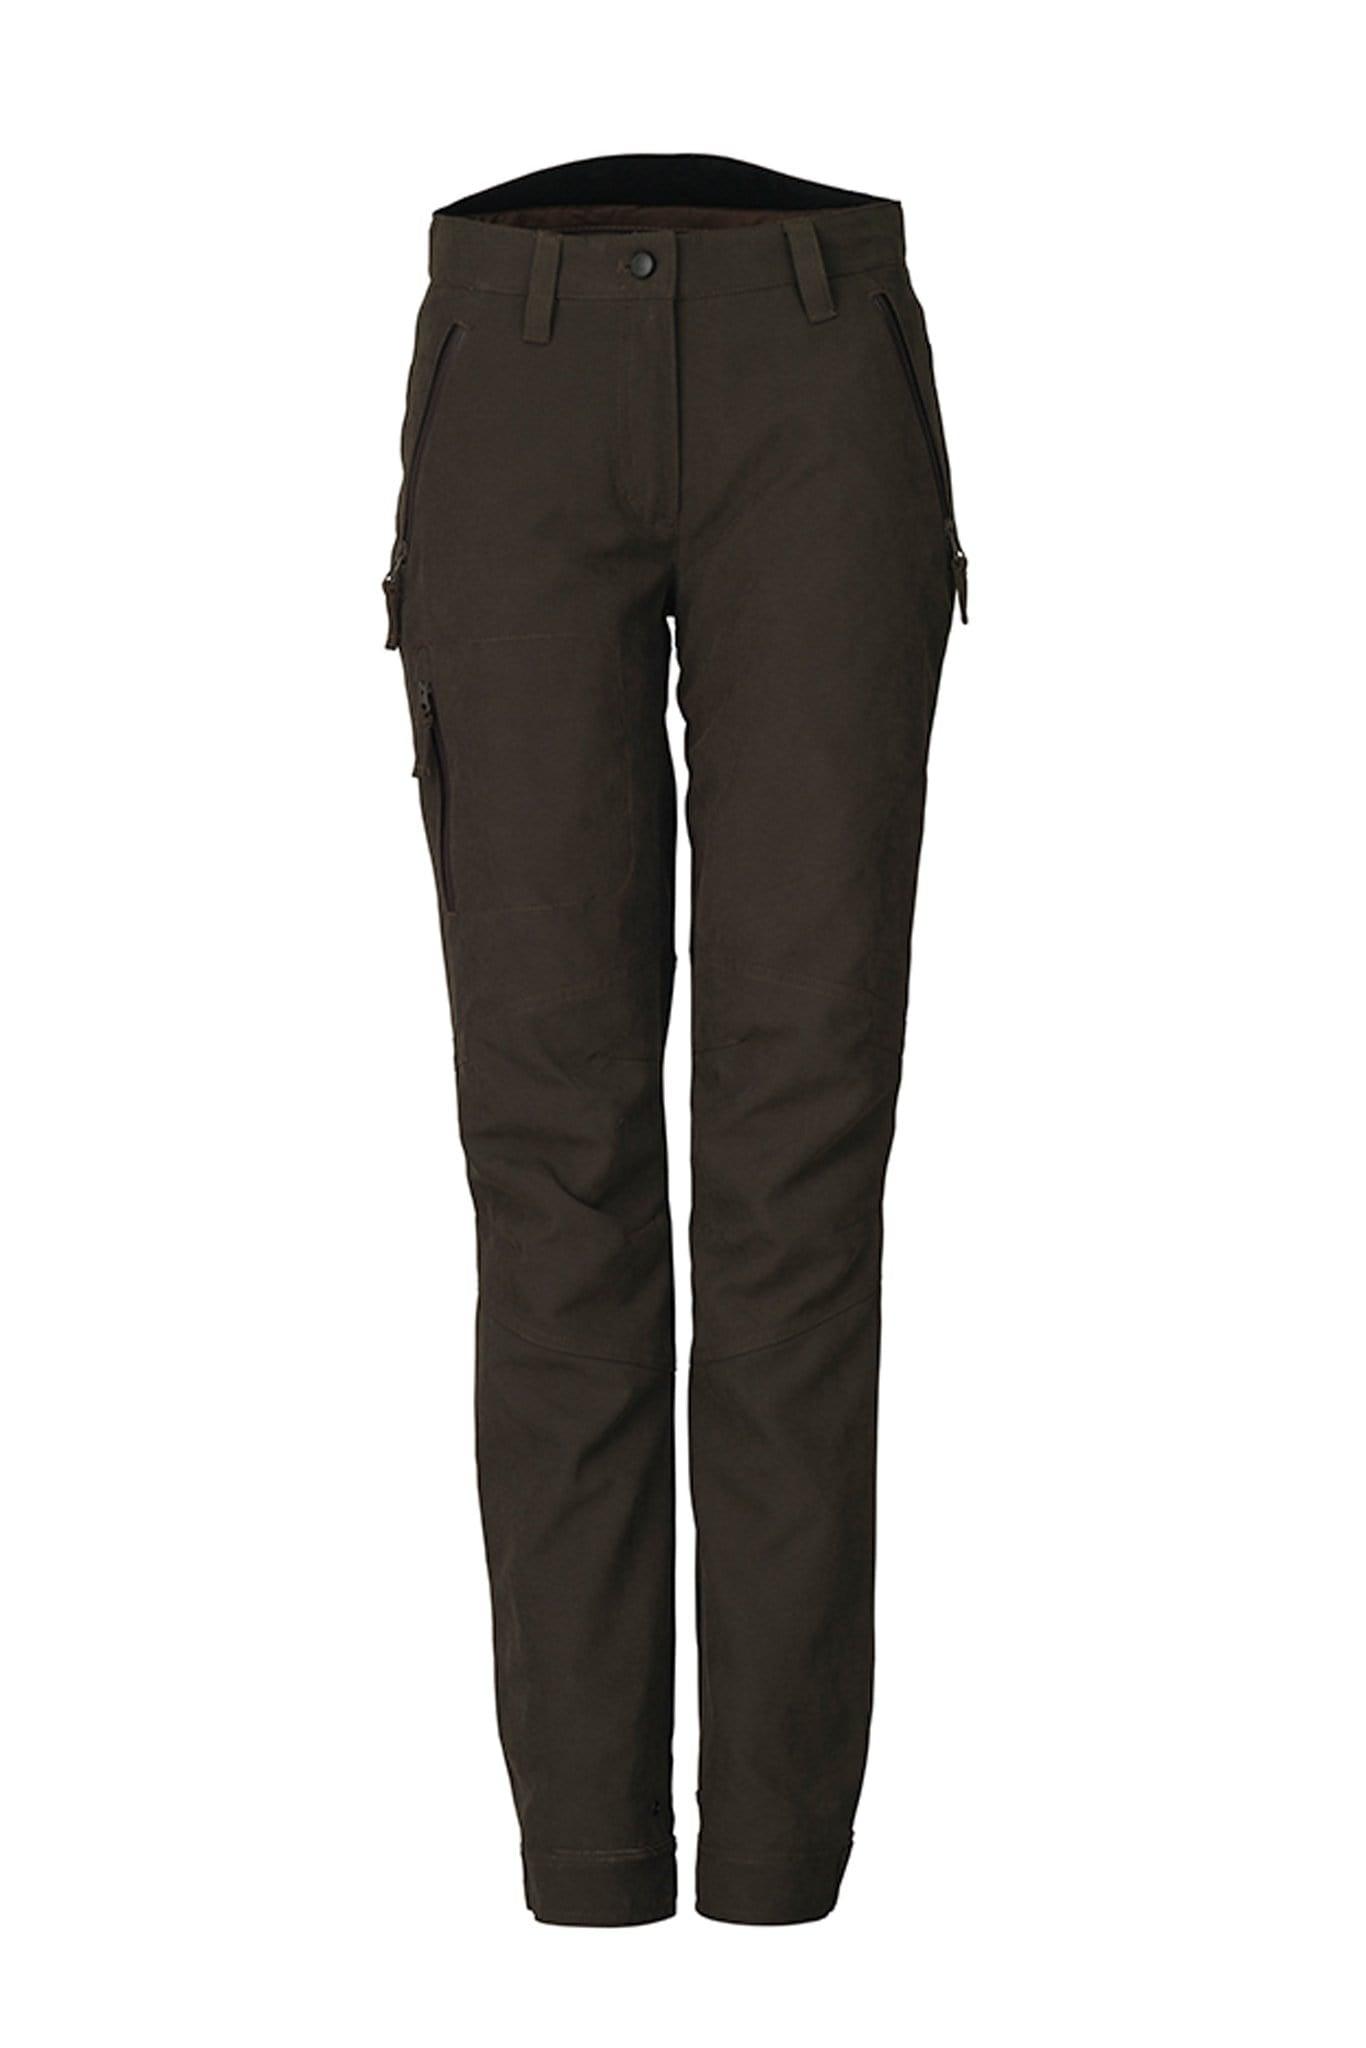 Laksen Trousers Laksen Trackmaster Ladies Trousers with CTX Olive